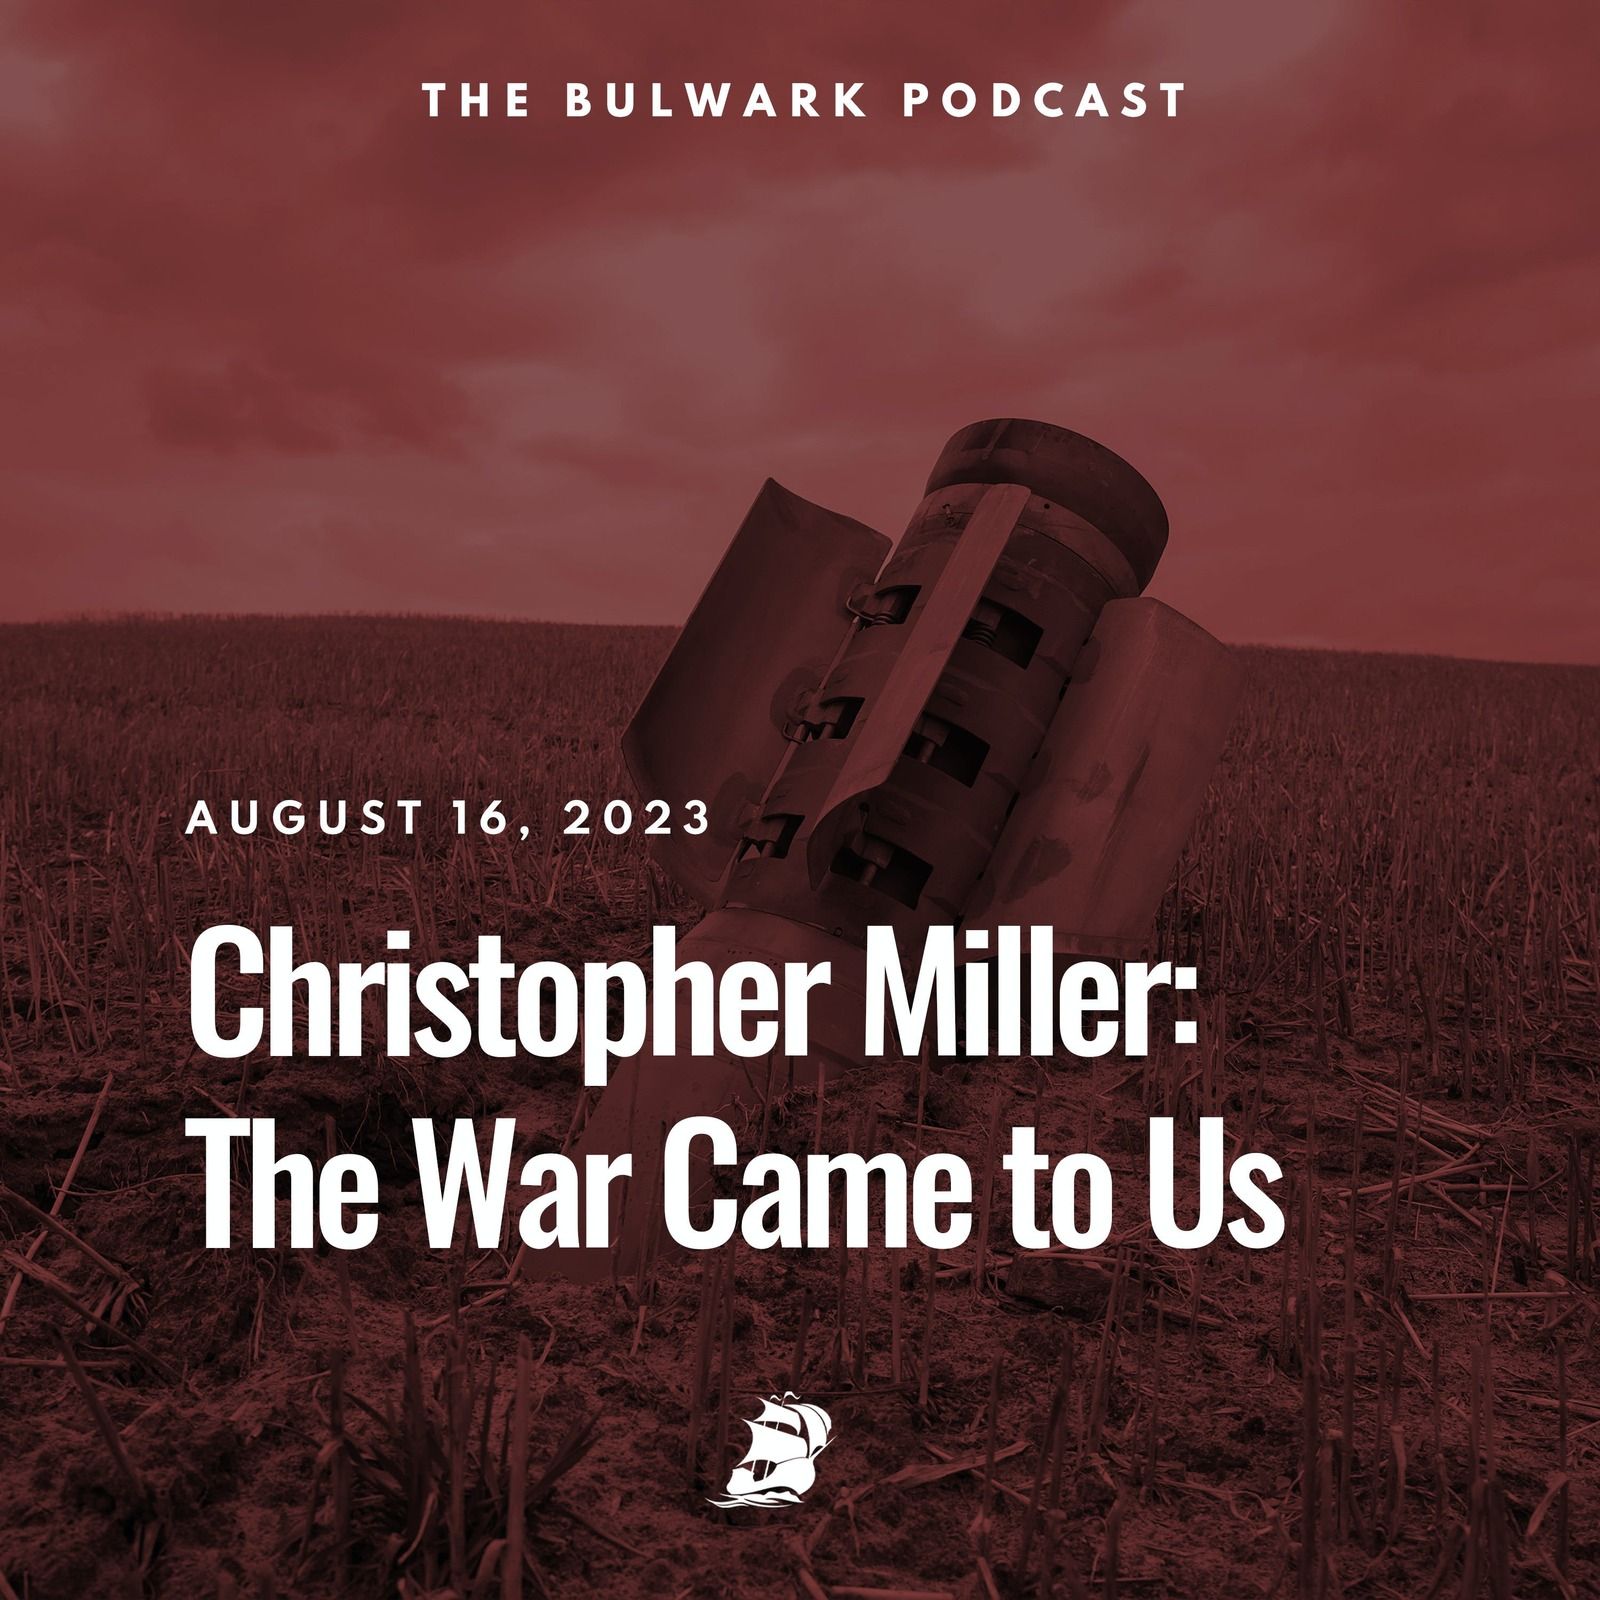 Christopher Miller: The War Came to Us